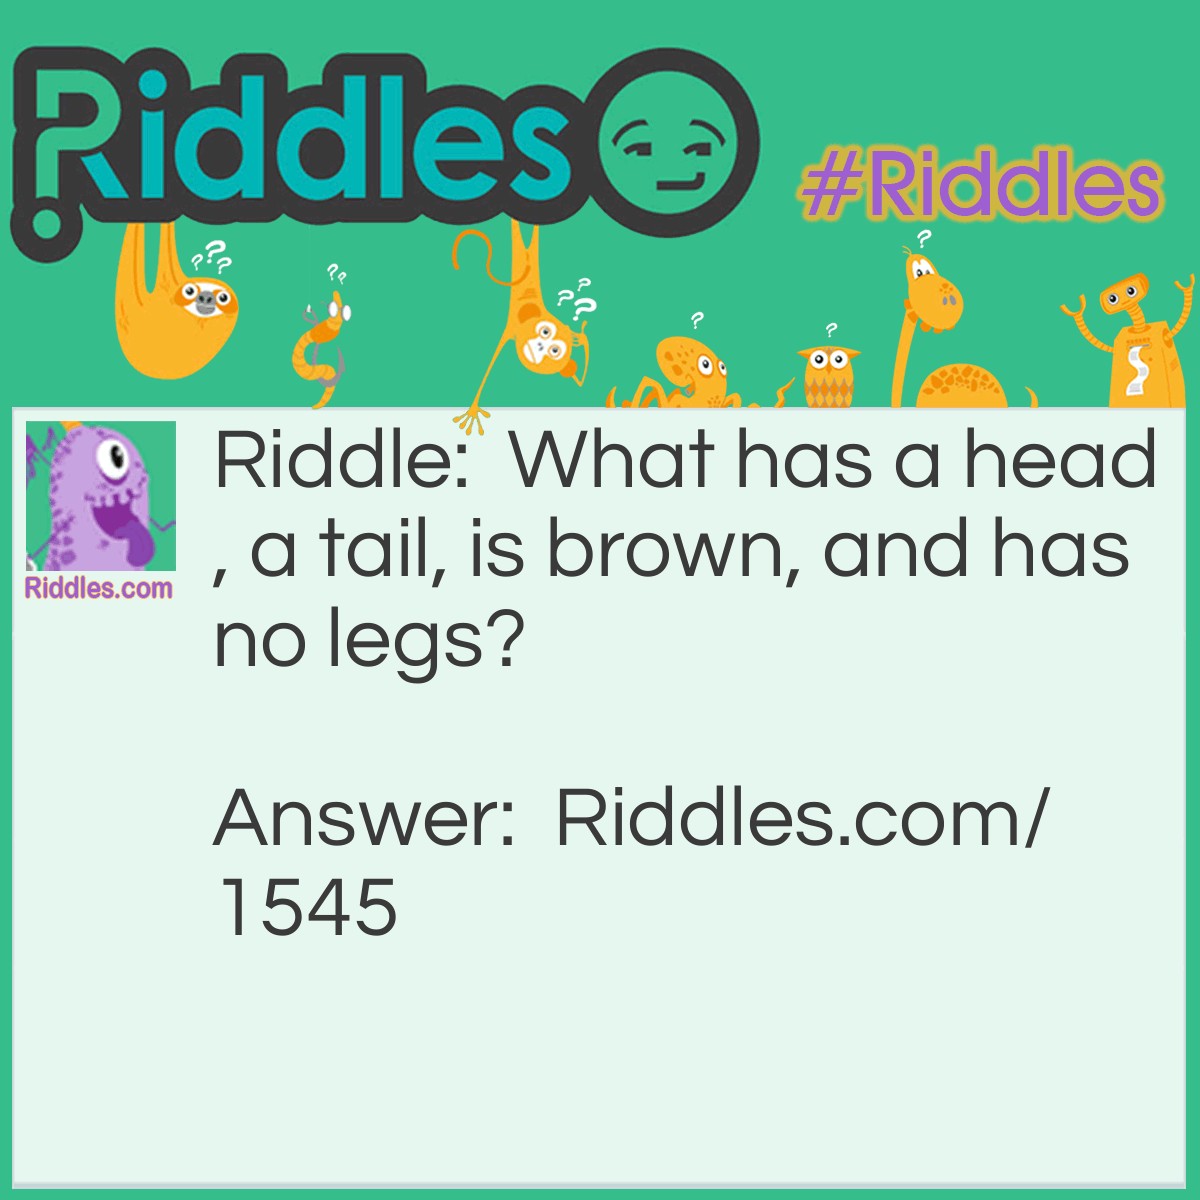 Riddle: What has a head, a tail, is brown, and has no legs? Answer: A penny